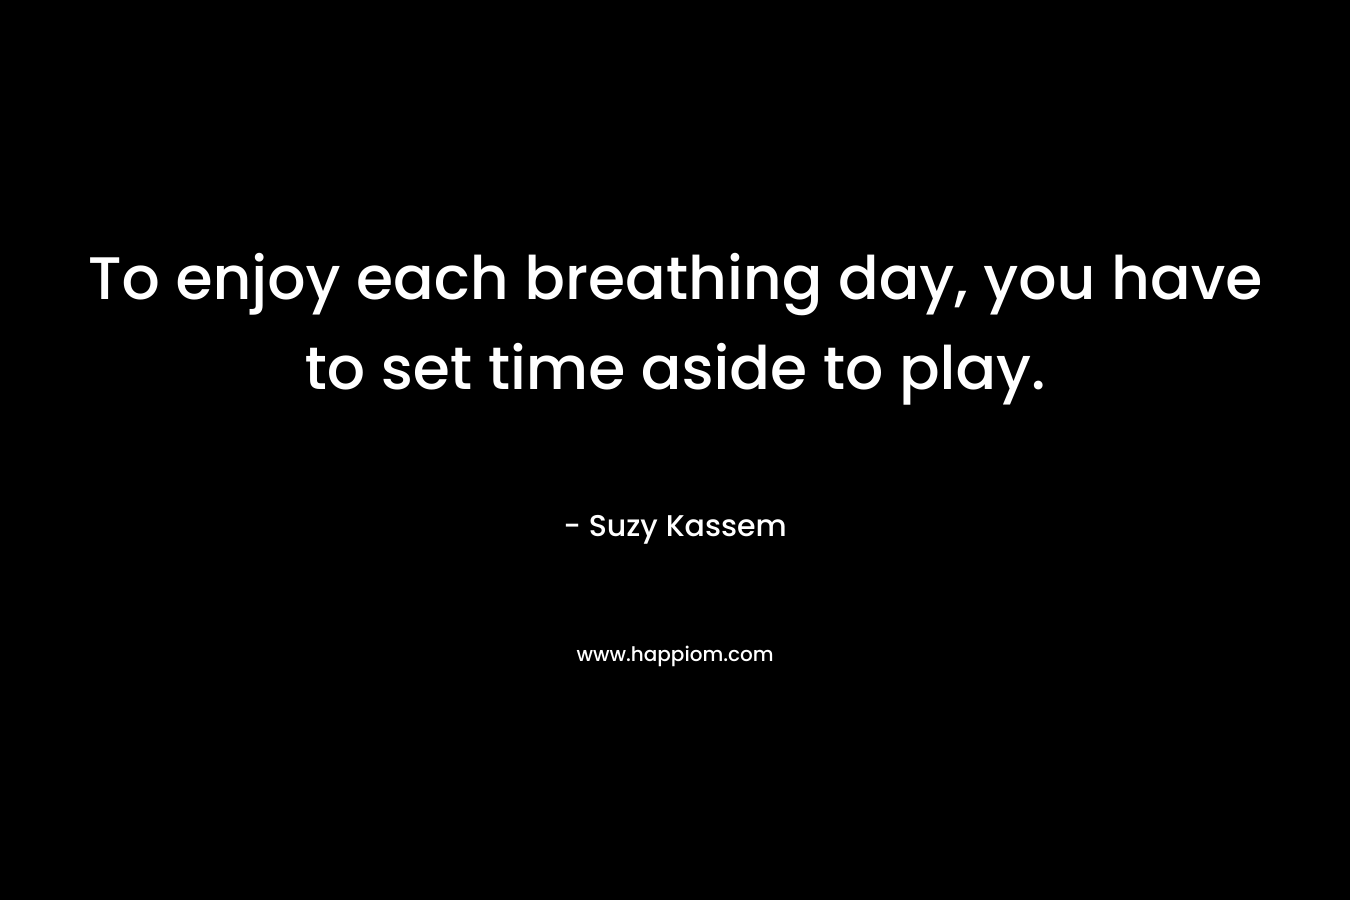 To enjoy each breathing day, you have to set time aside to play.